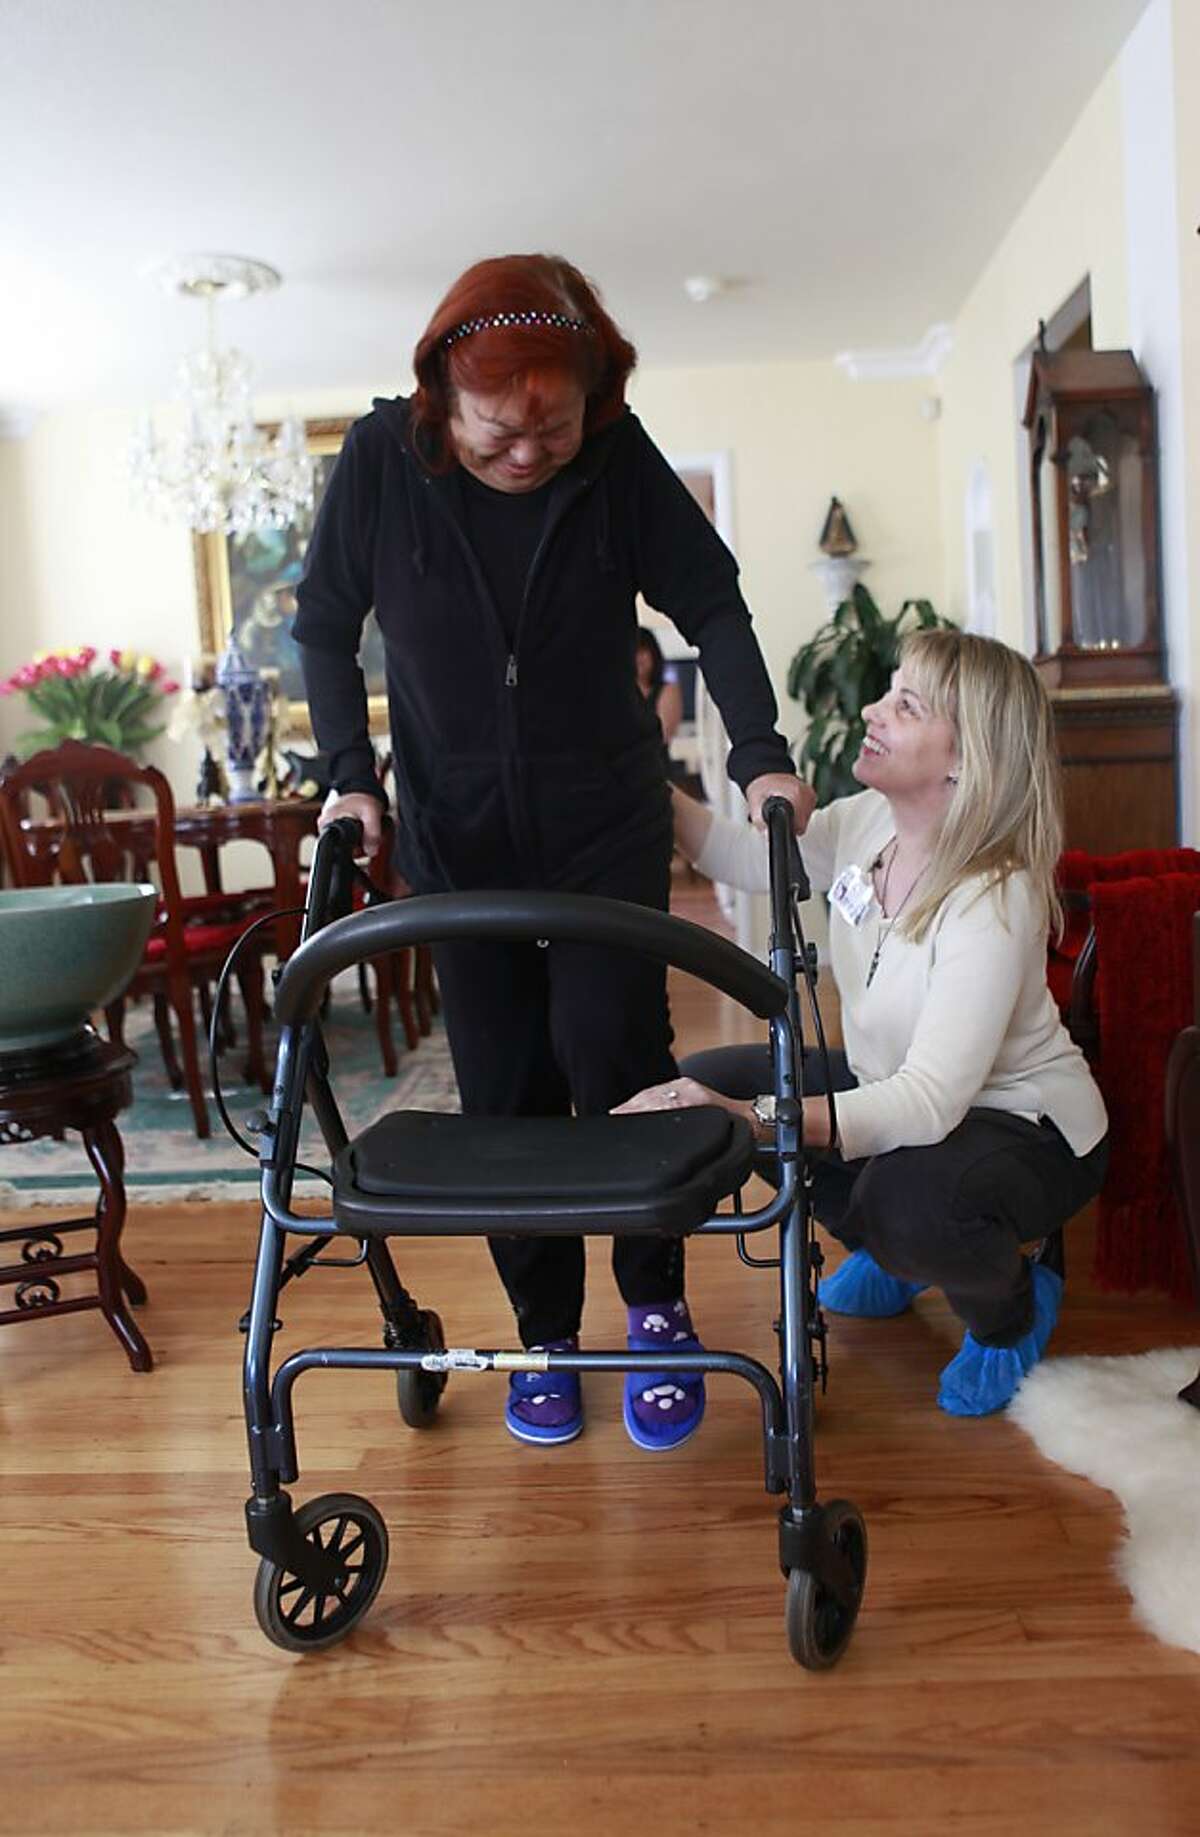 Amy Garfinkle works as a physical therapist for a home health care agency in the East Bay. She visits one of her favorite patients, Milagros Montoya, who is recovering from a full knee replacement, to help her re-learn to walk in San Leandro, Calif., on Tuesday, May 1st , 2012.